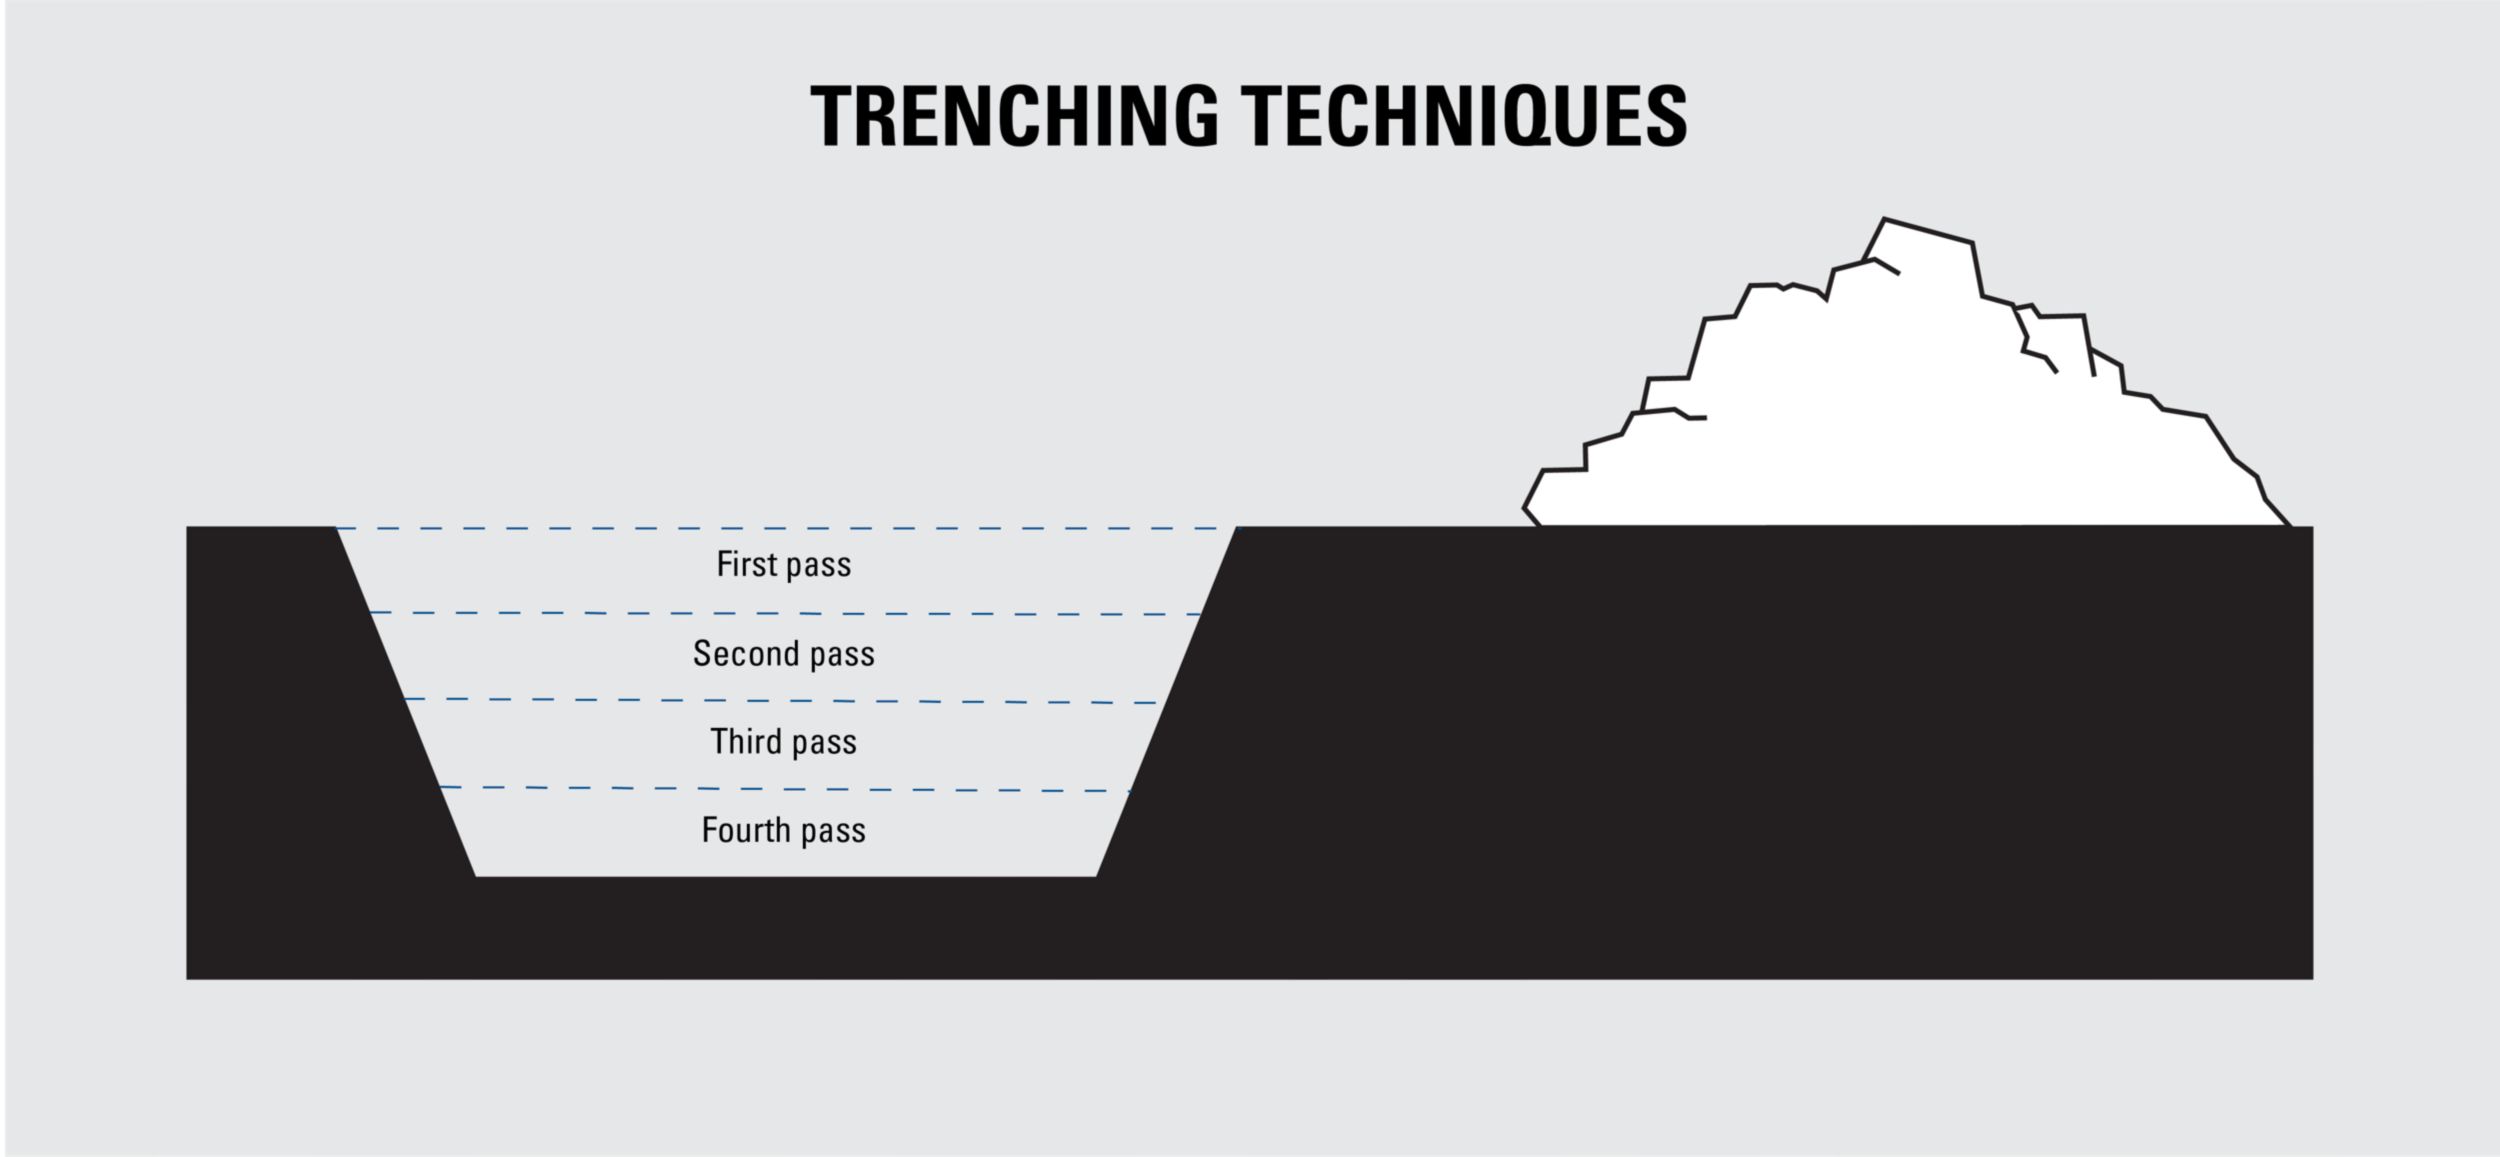 TRENCHING TECHNIQUES